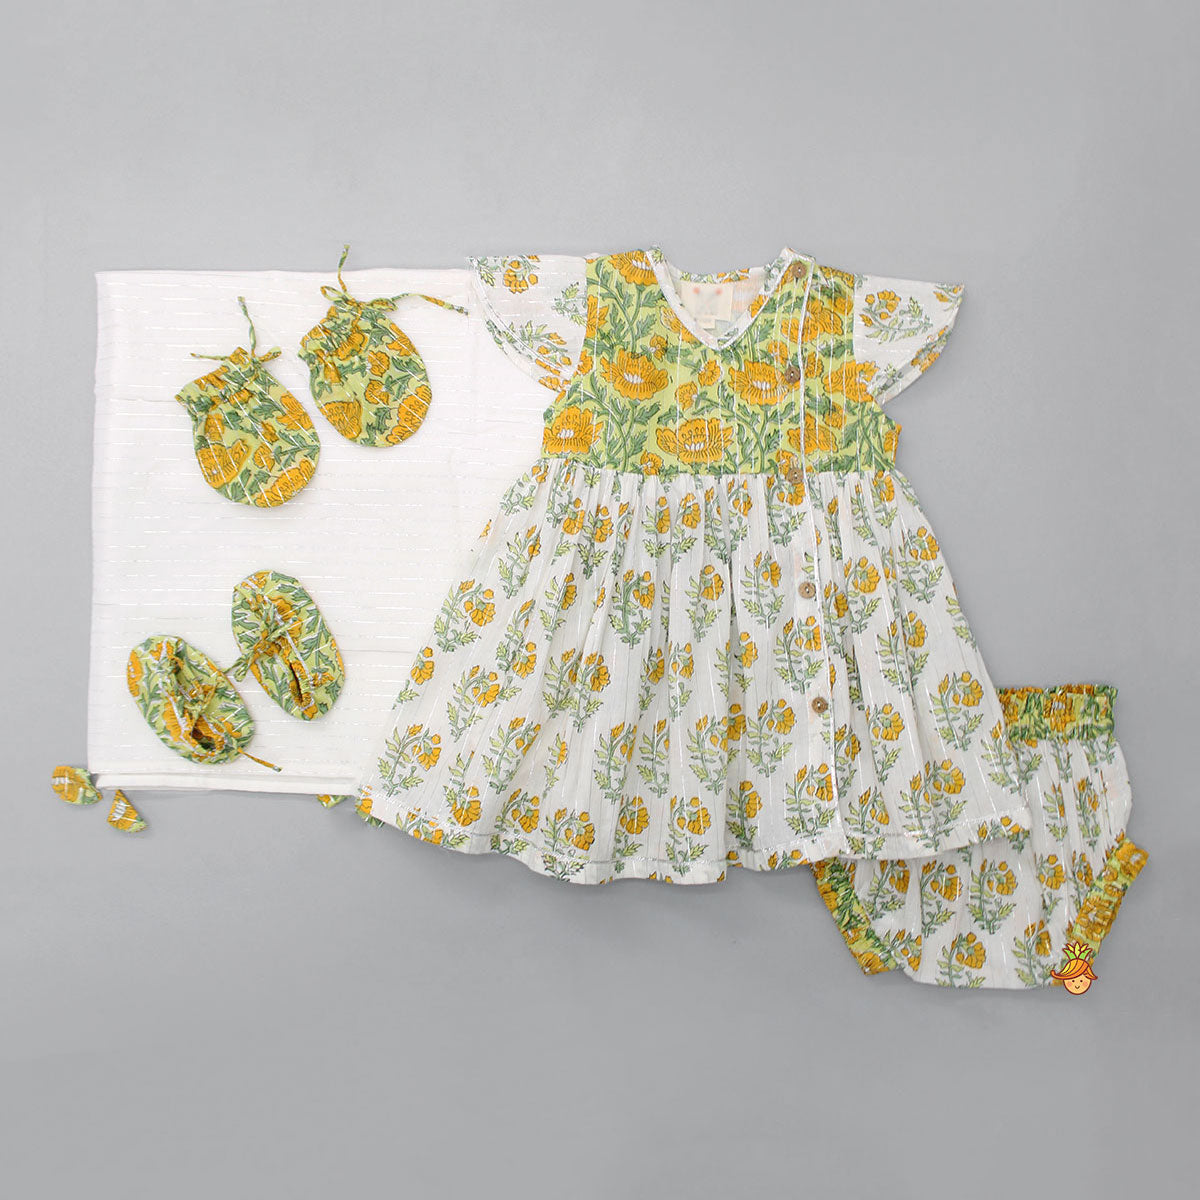 Pre Order: Hand Block Printed Multicolour Infant Baby Set With Swaddle